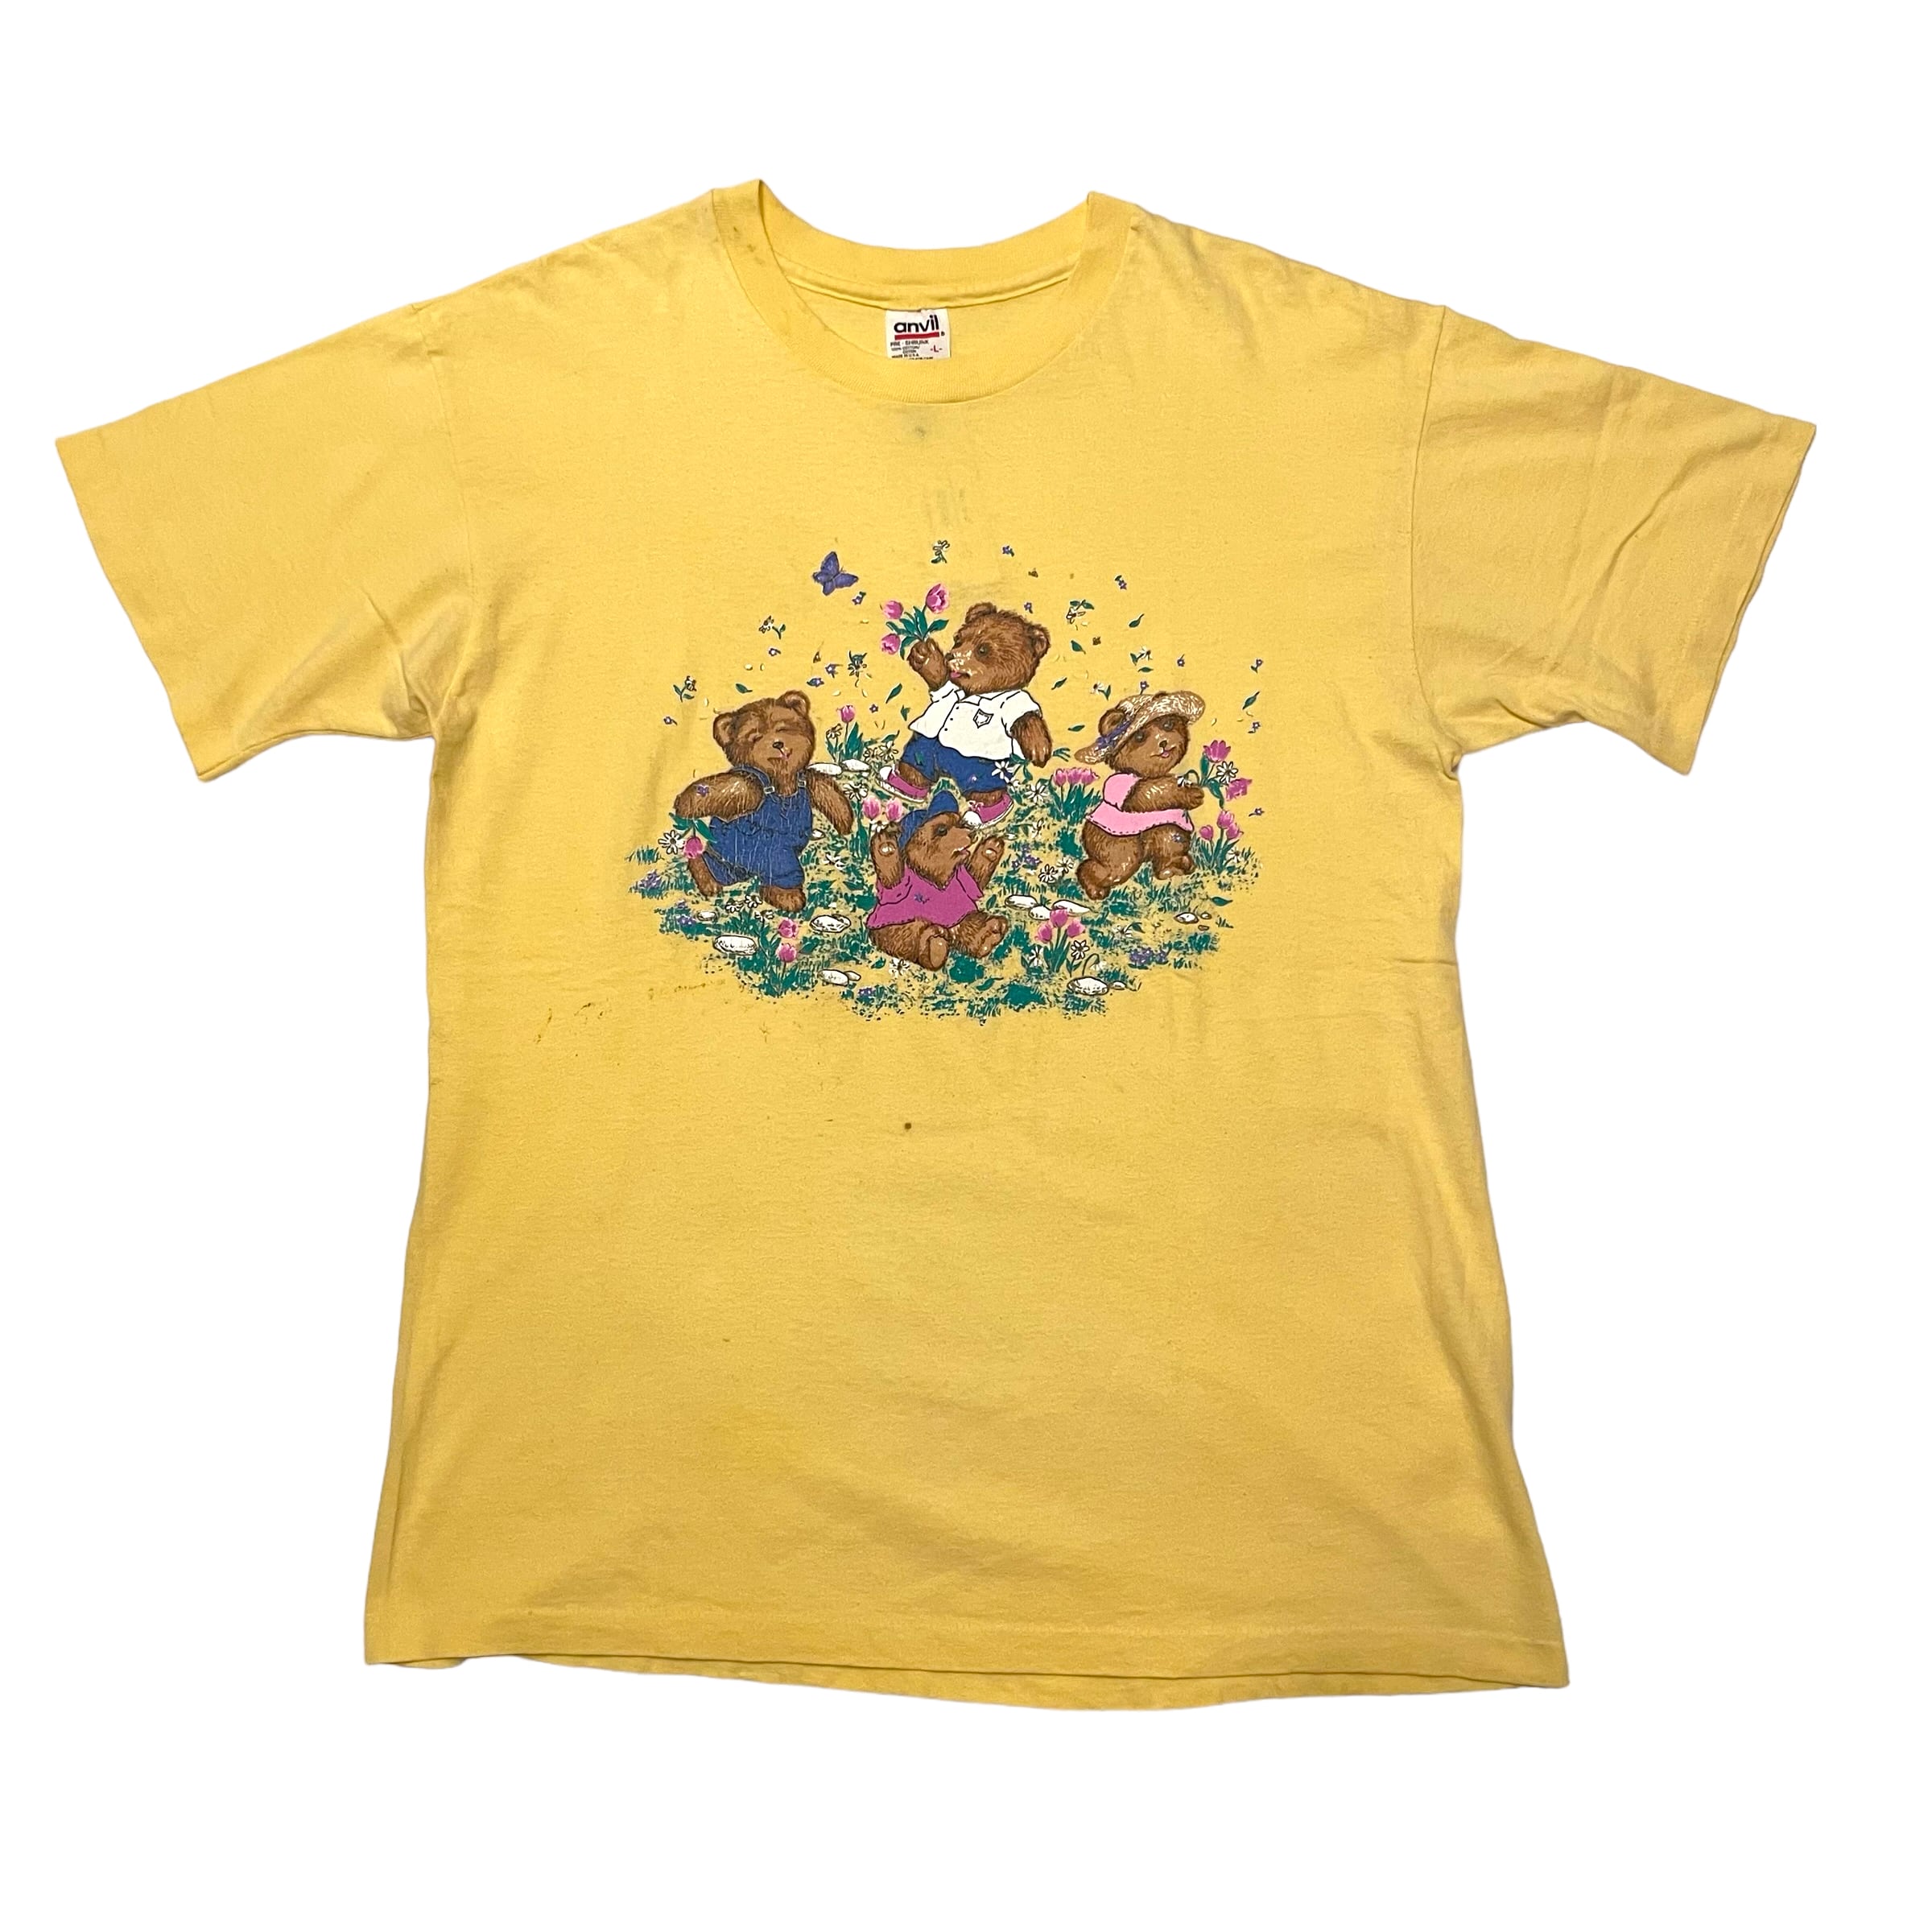 90's anvil Bear print tee made in USA【L】②